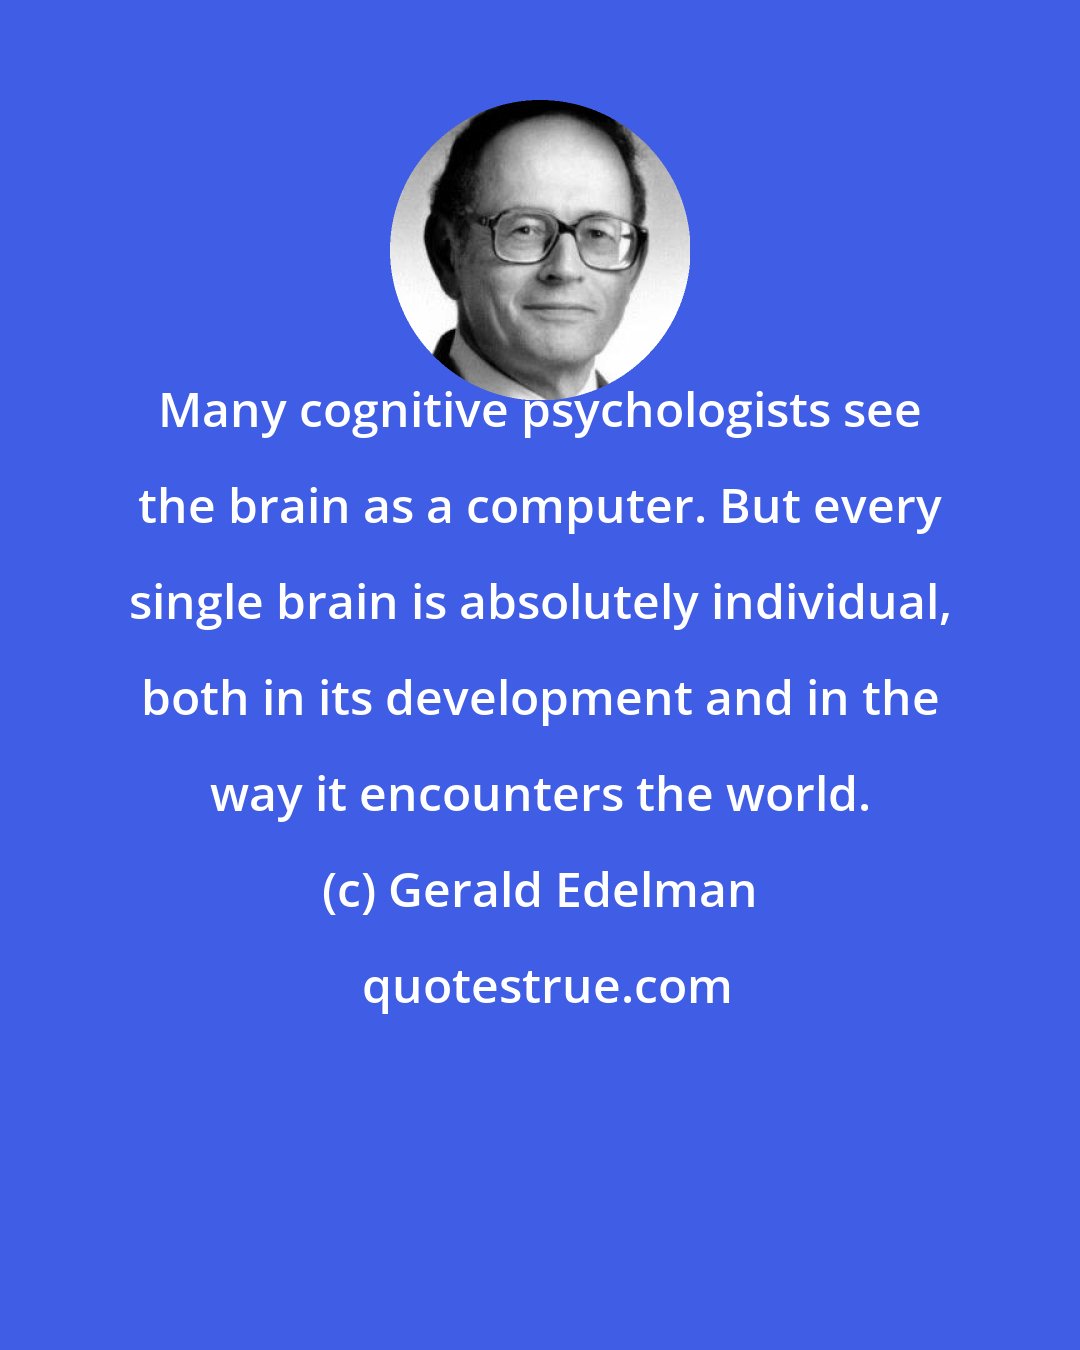 Gerald Edelman: Many cognitive psychologists see the brain as a computer. But every single brain is absolutely individual, both in its development and in the way it encounters the world.